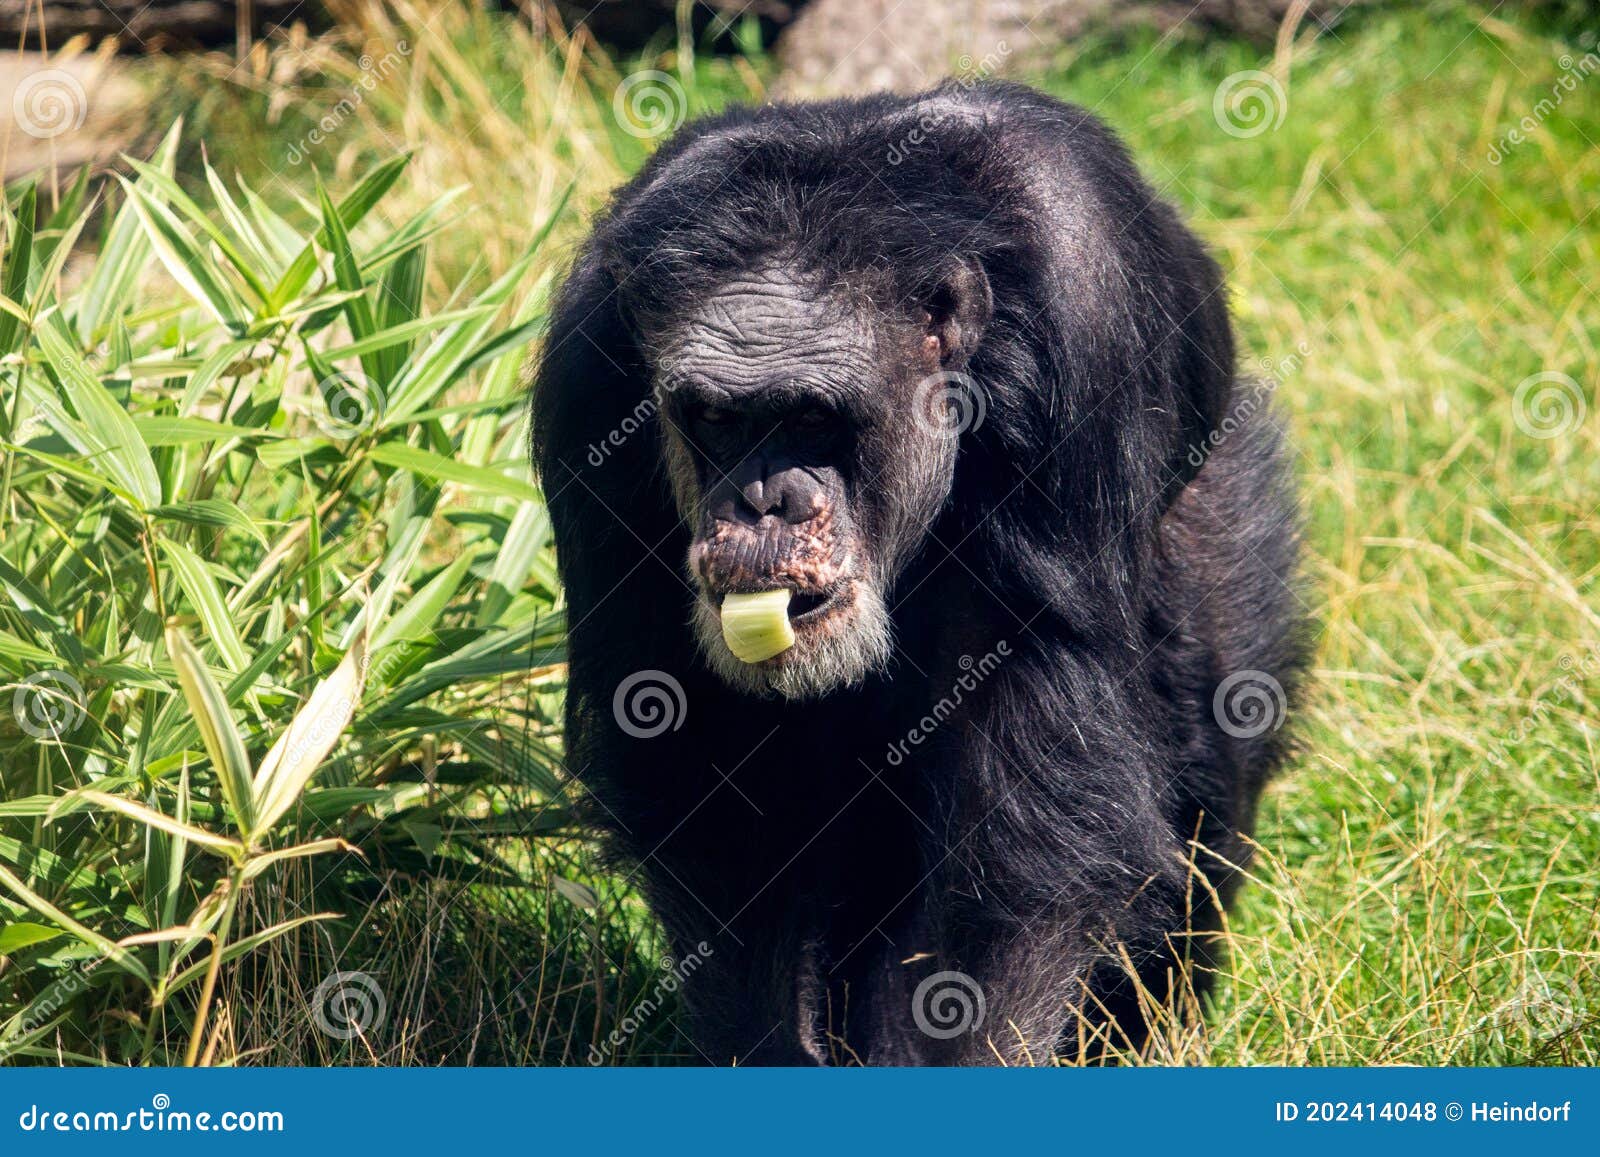 the chimpanzees, pan, are a genus of the great ape family, hominidae